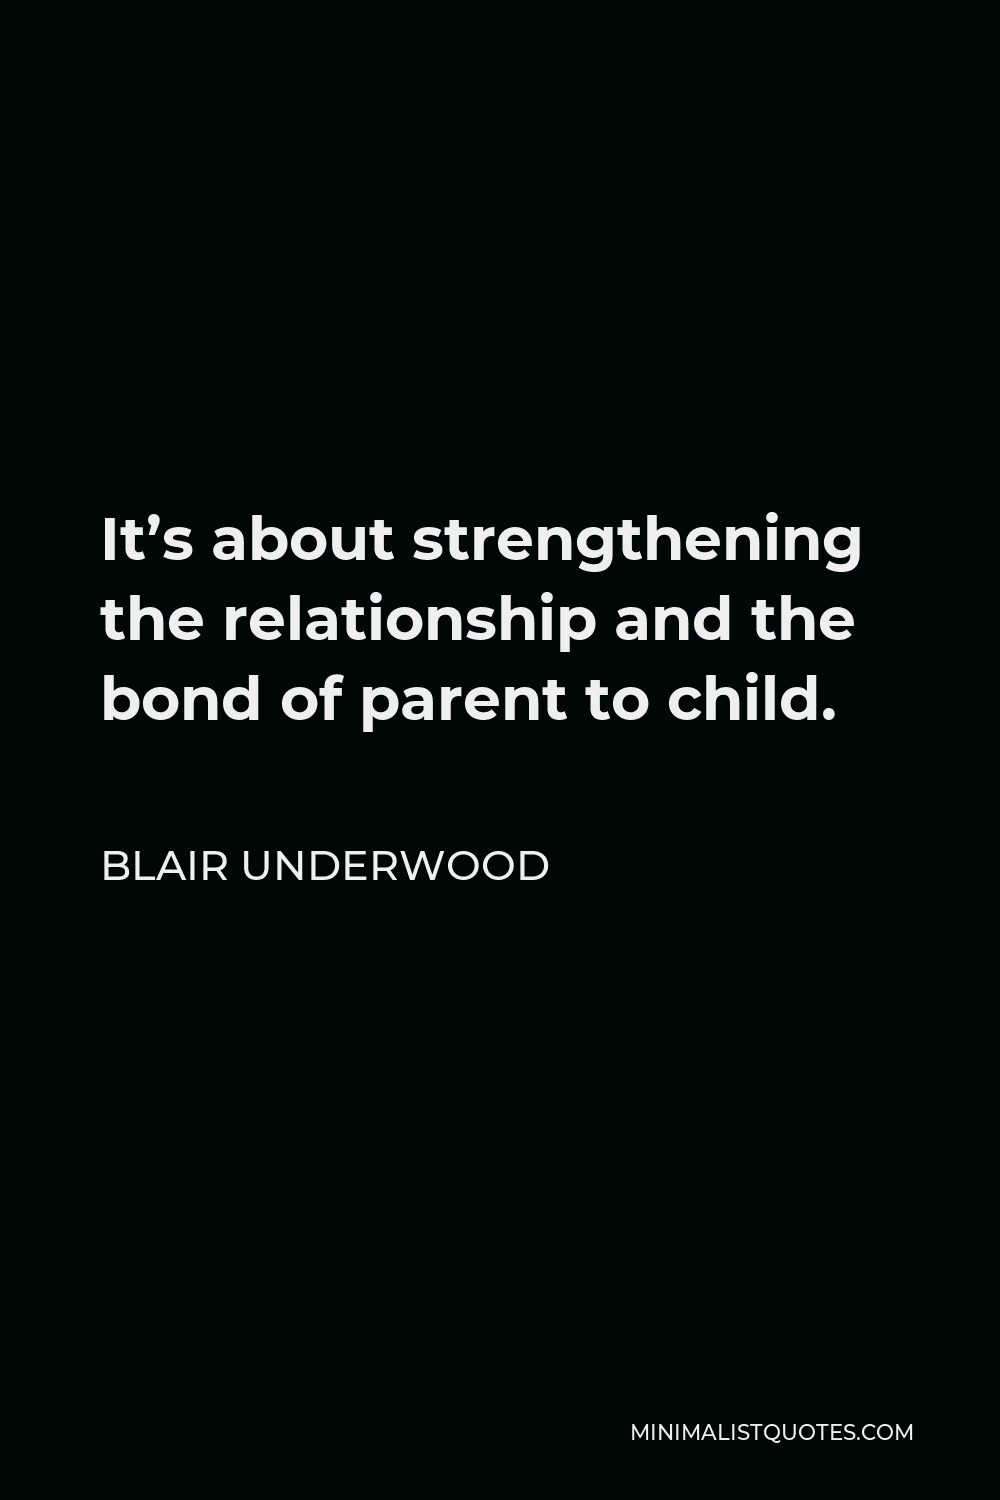 Blair Underwood Quote - It’s about strengthening the relationship and the bond of parent to child.